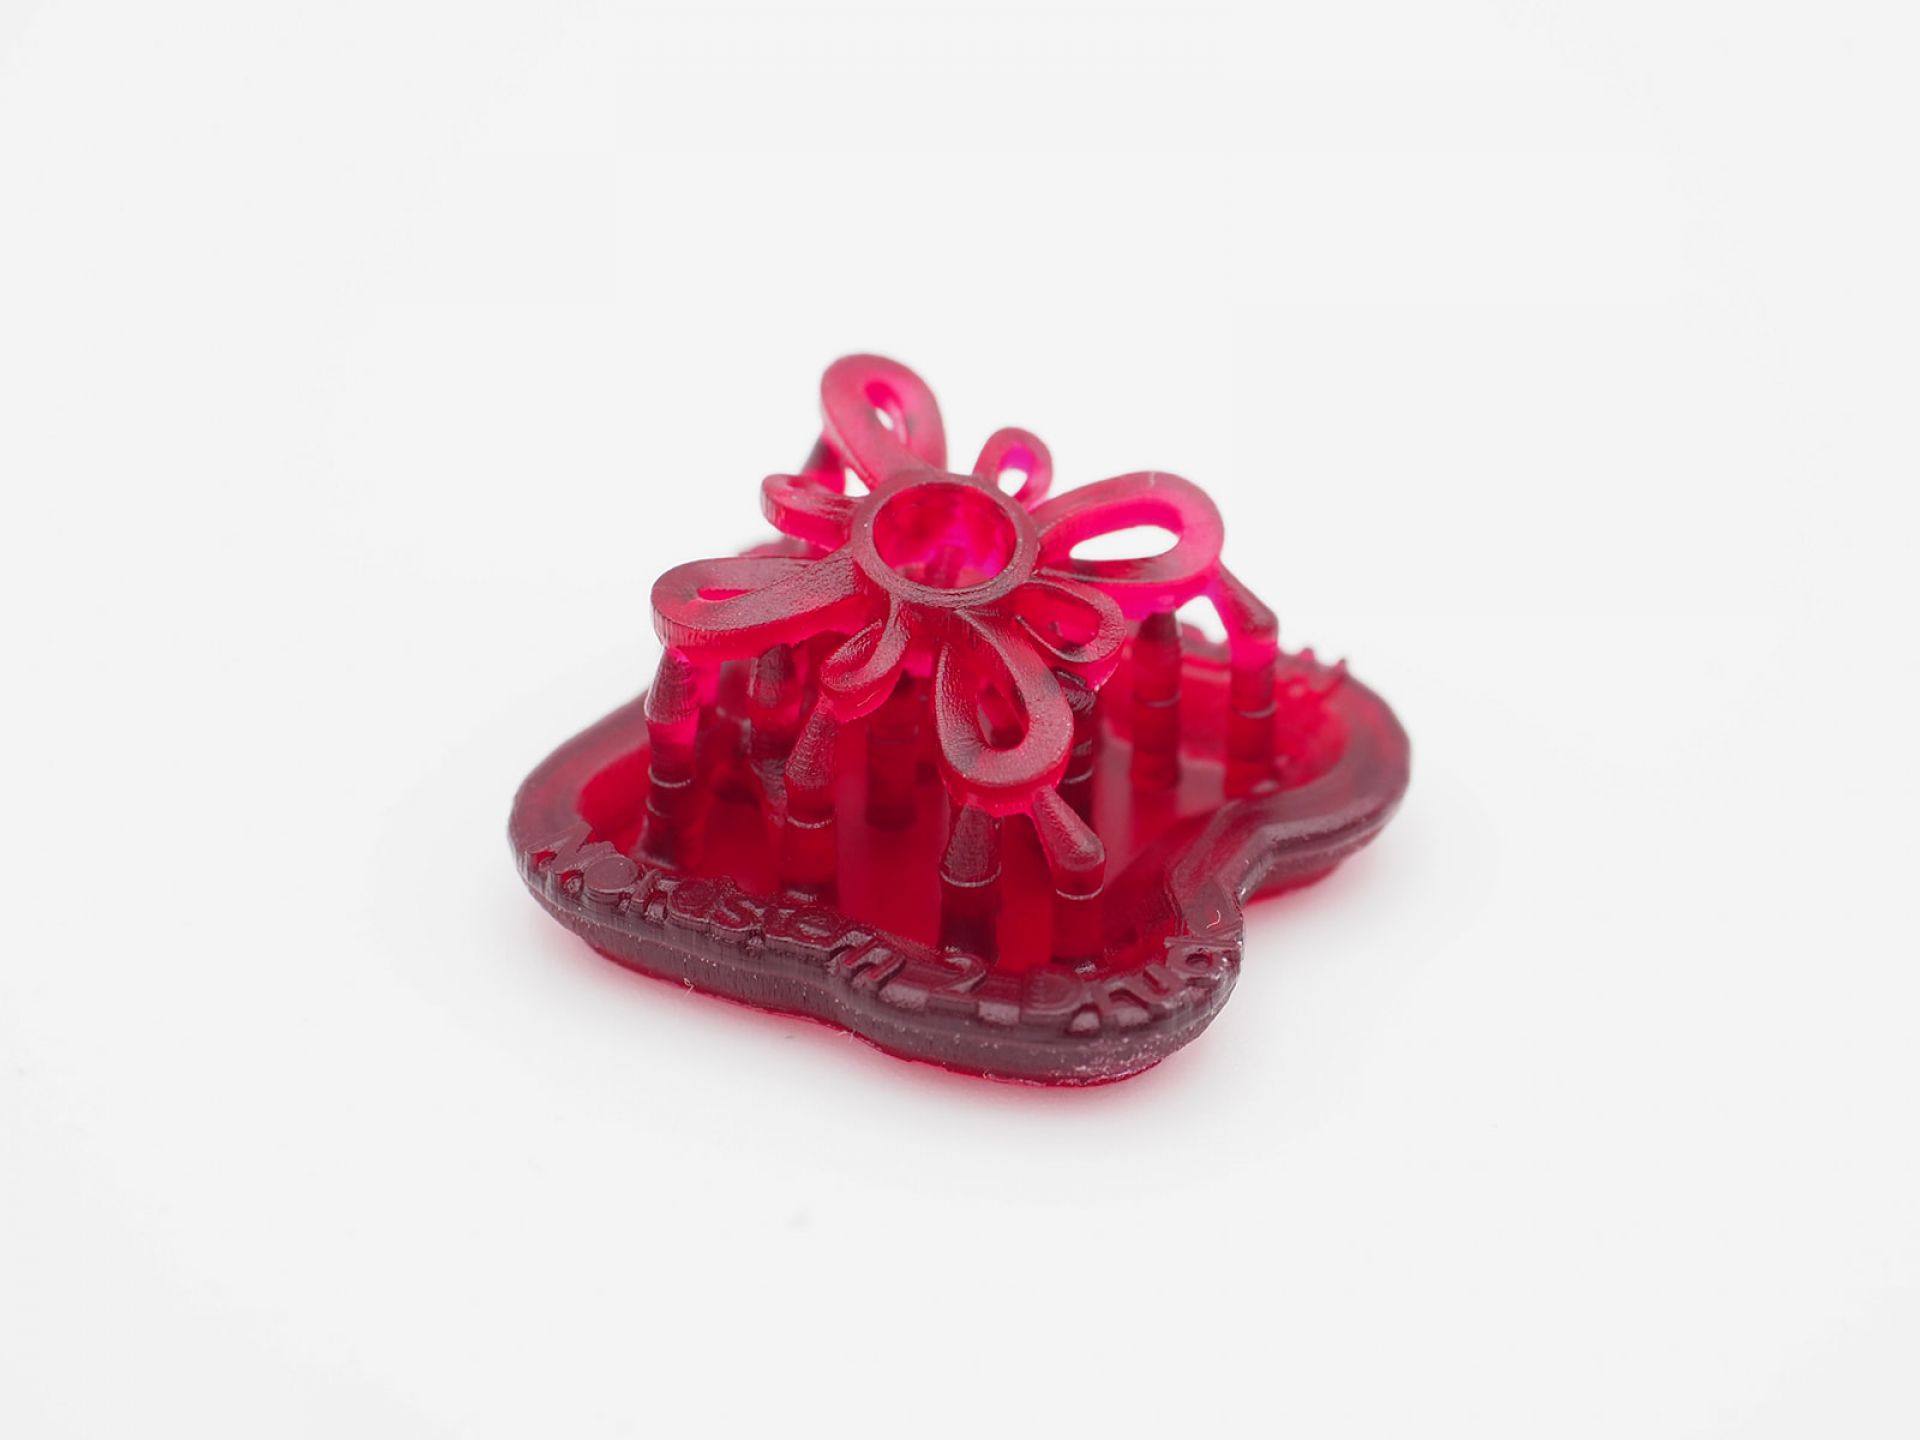 Castable Resin Material for 3D Printing for Jewelry | TIKO-G Pro